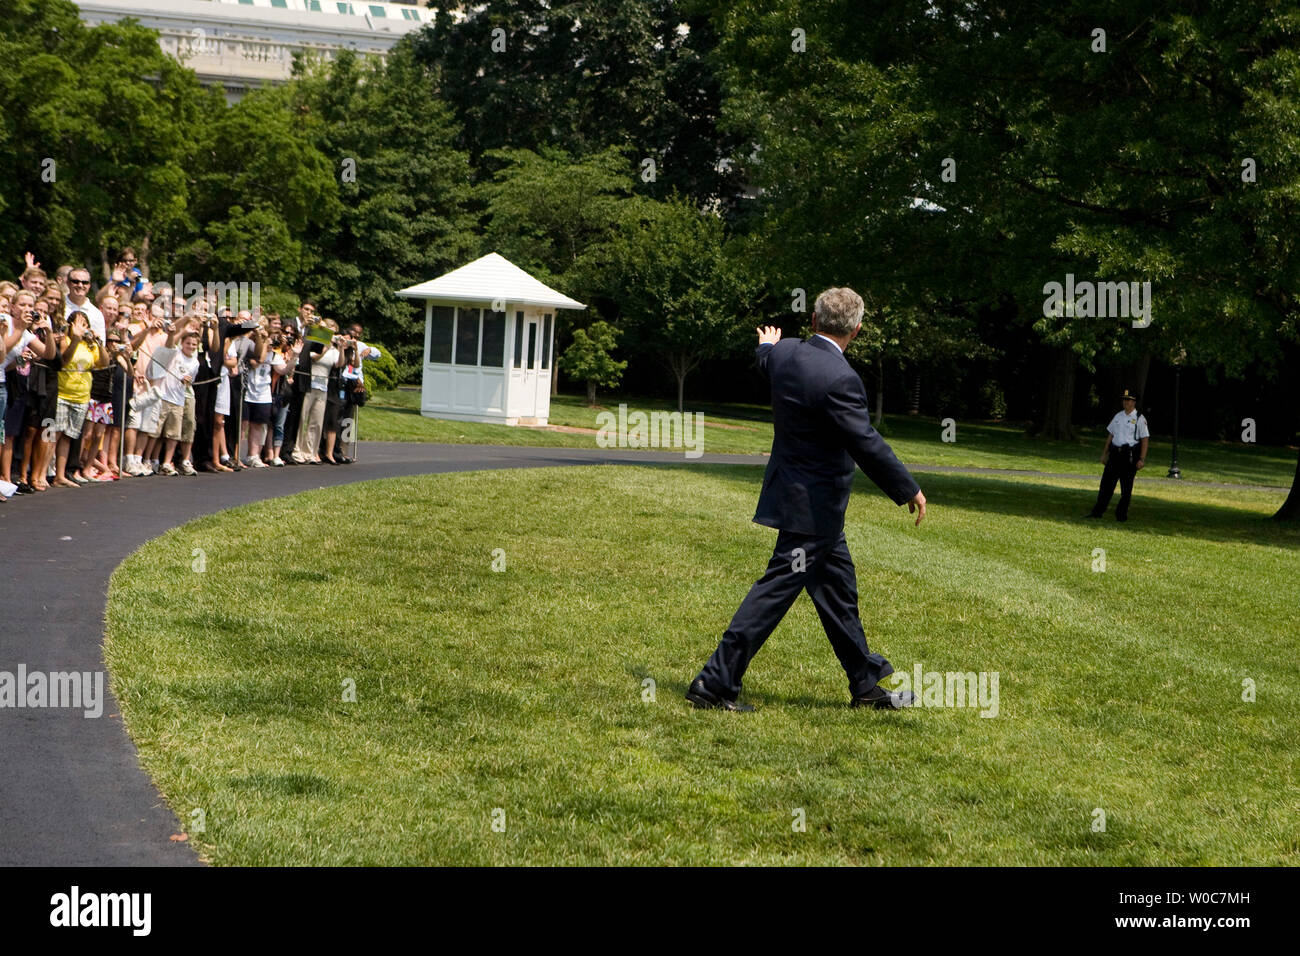 U.S. President George W. Bush waves to members of the public as he walks on the South Lawn of the White House toward Marine One in Washington on June 6, 2008. President Bush is going to Camp David for the weekend. (UPI Photo/Patrick D. McDermott)  (UPI Photo/Patrick D. McDermott) Stock Photo